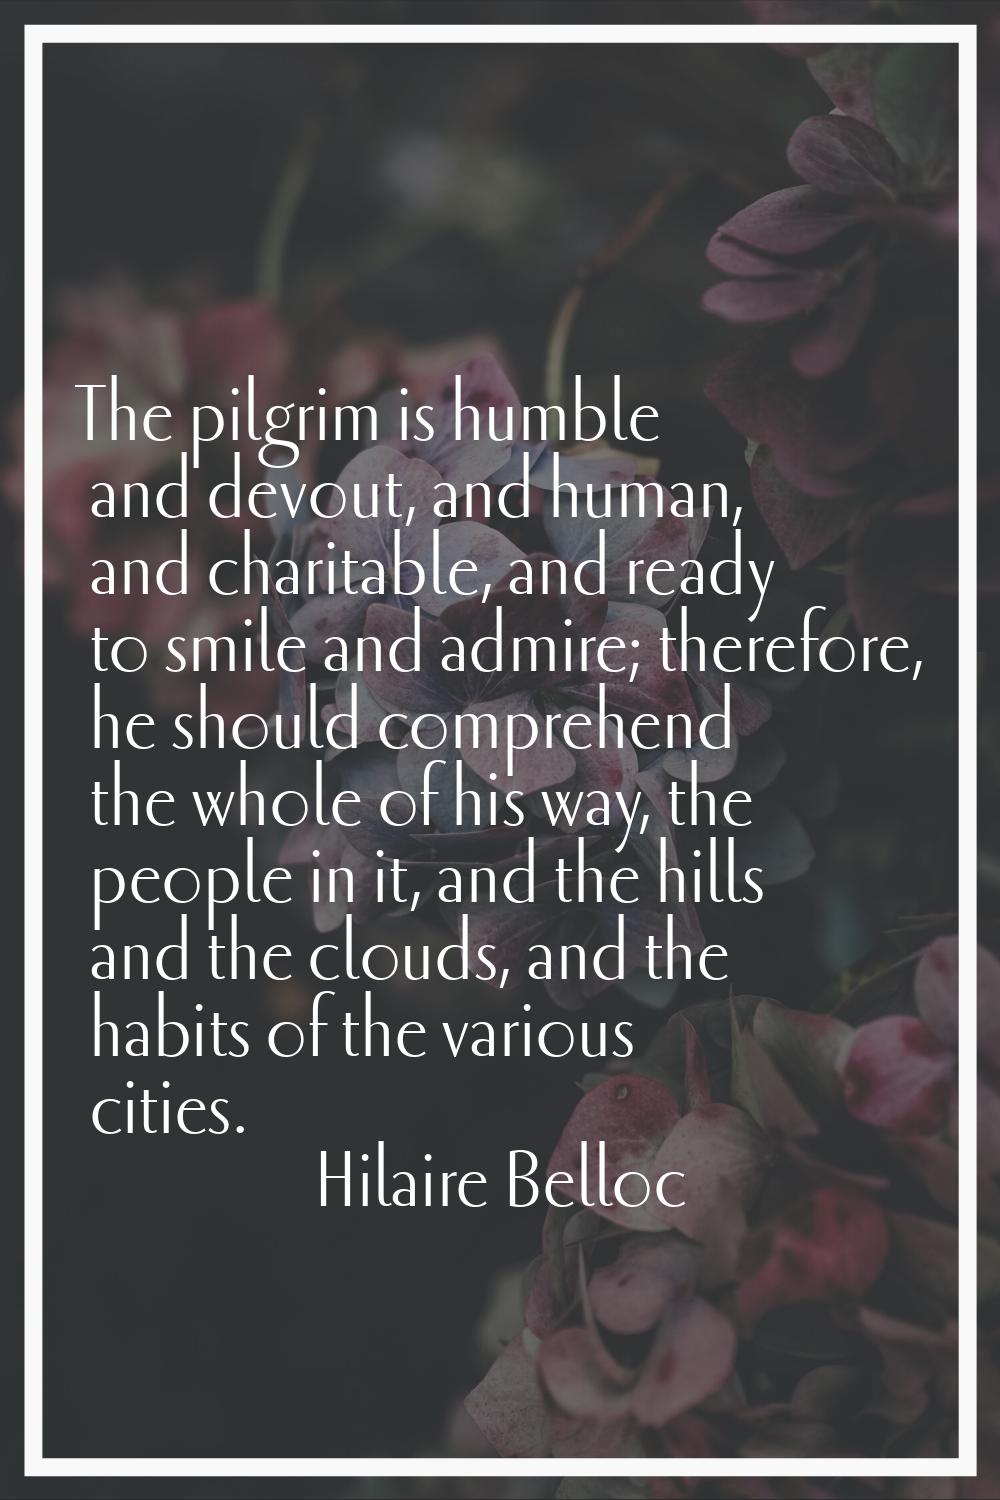 The pilgrim is humble and devout, and human, and charitable, and ready to smile and admire; therefo